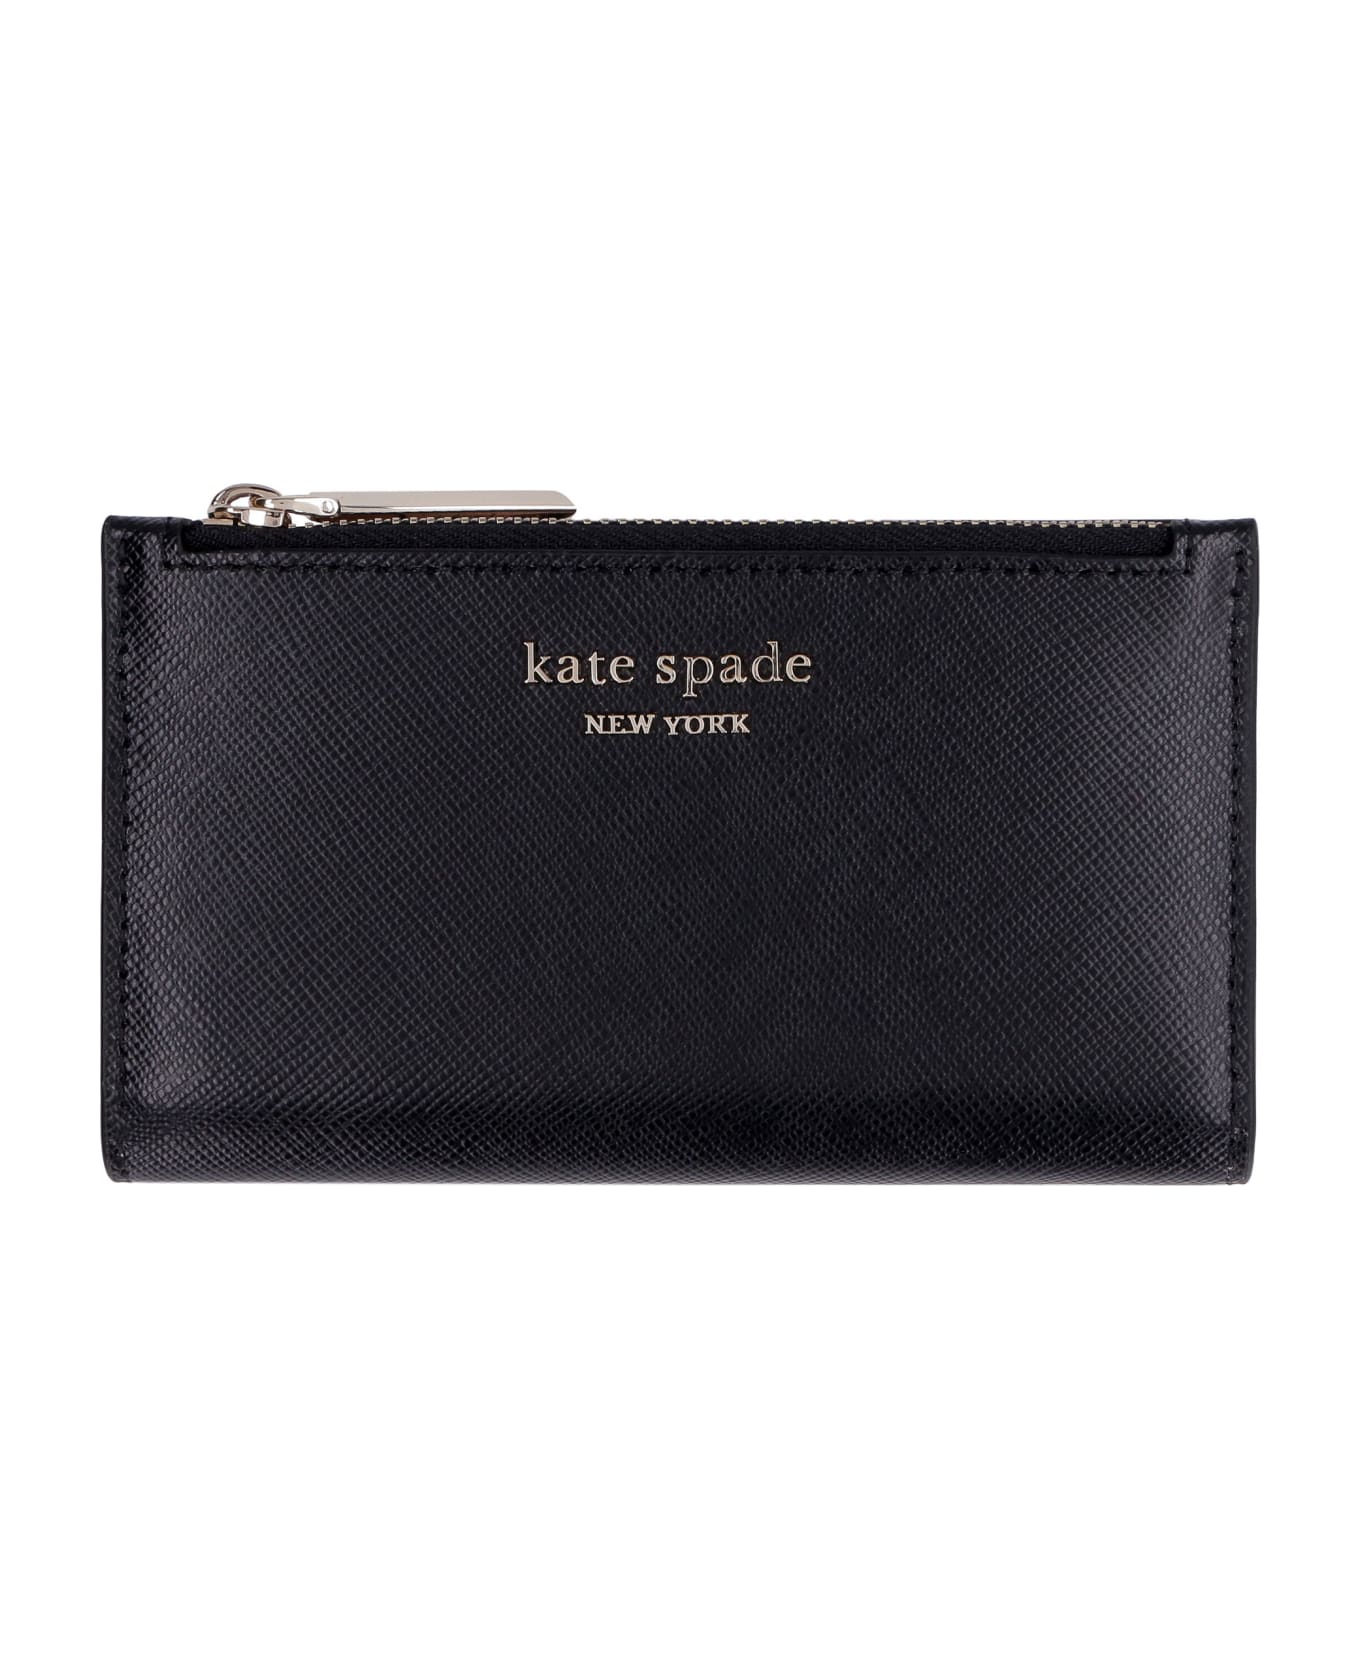 Kate Spade Spencer Saffiano Leather Small Wallet | italist, ALWAYS LIKE A  SALE